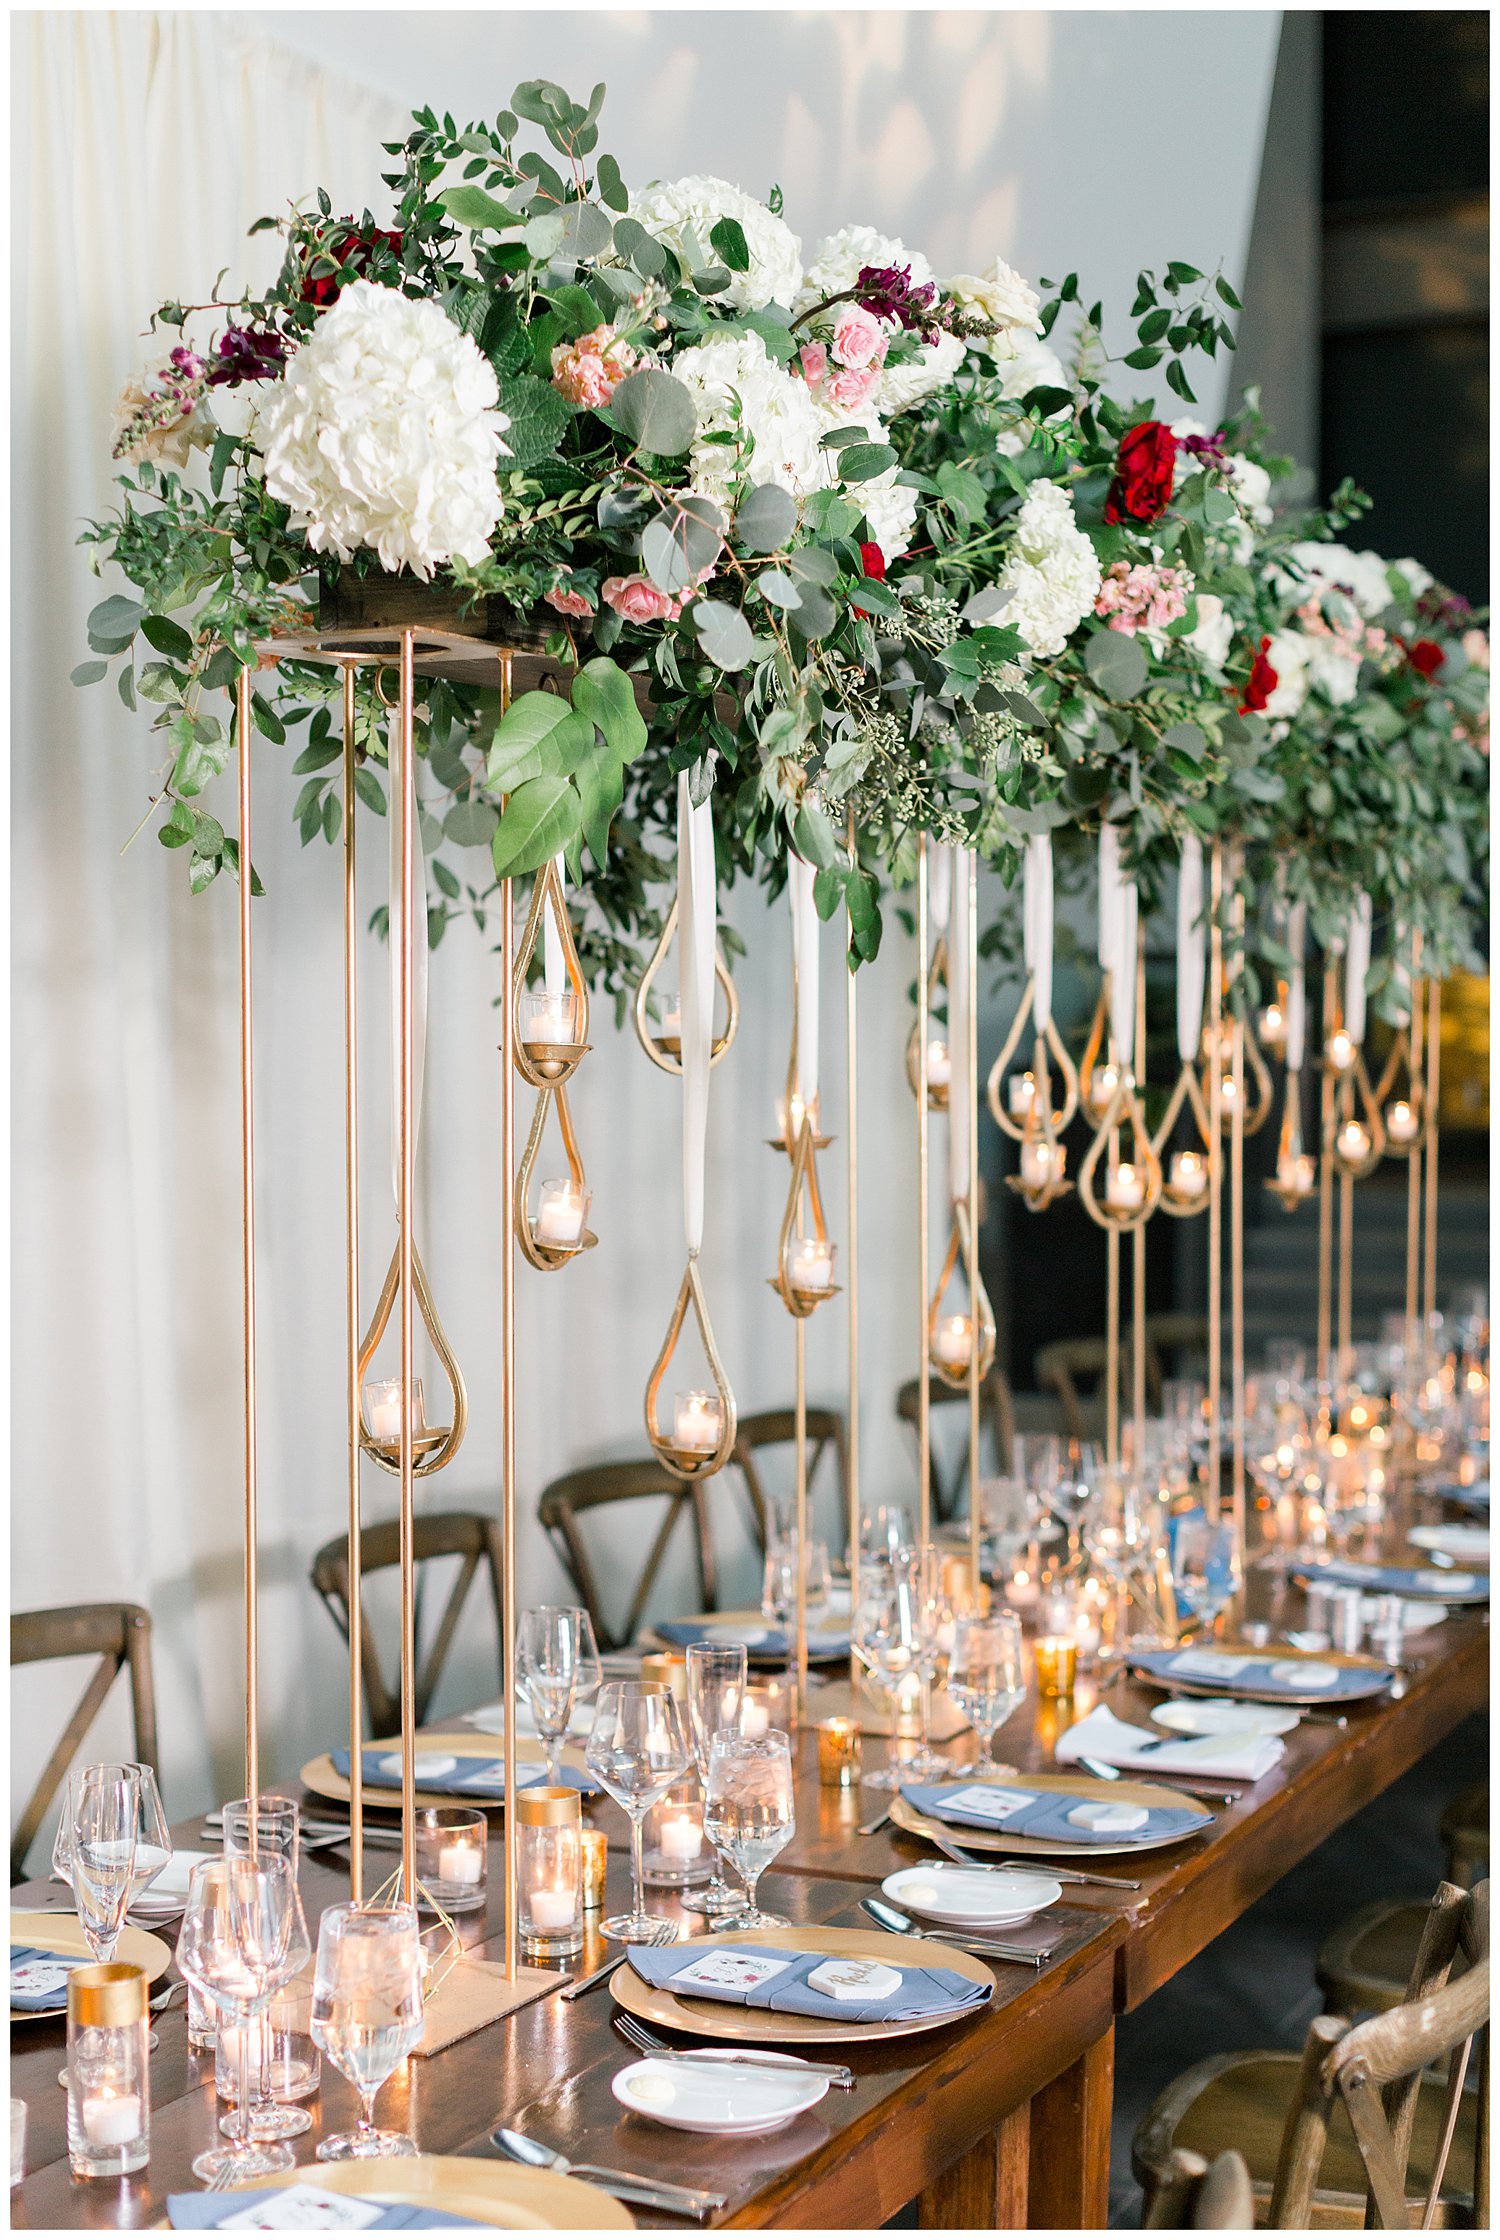 Floral and greenery head table wedding reception decor at Ritz Carlton Charlotte